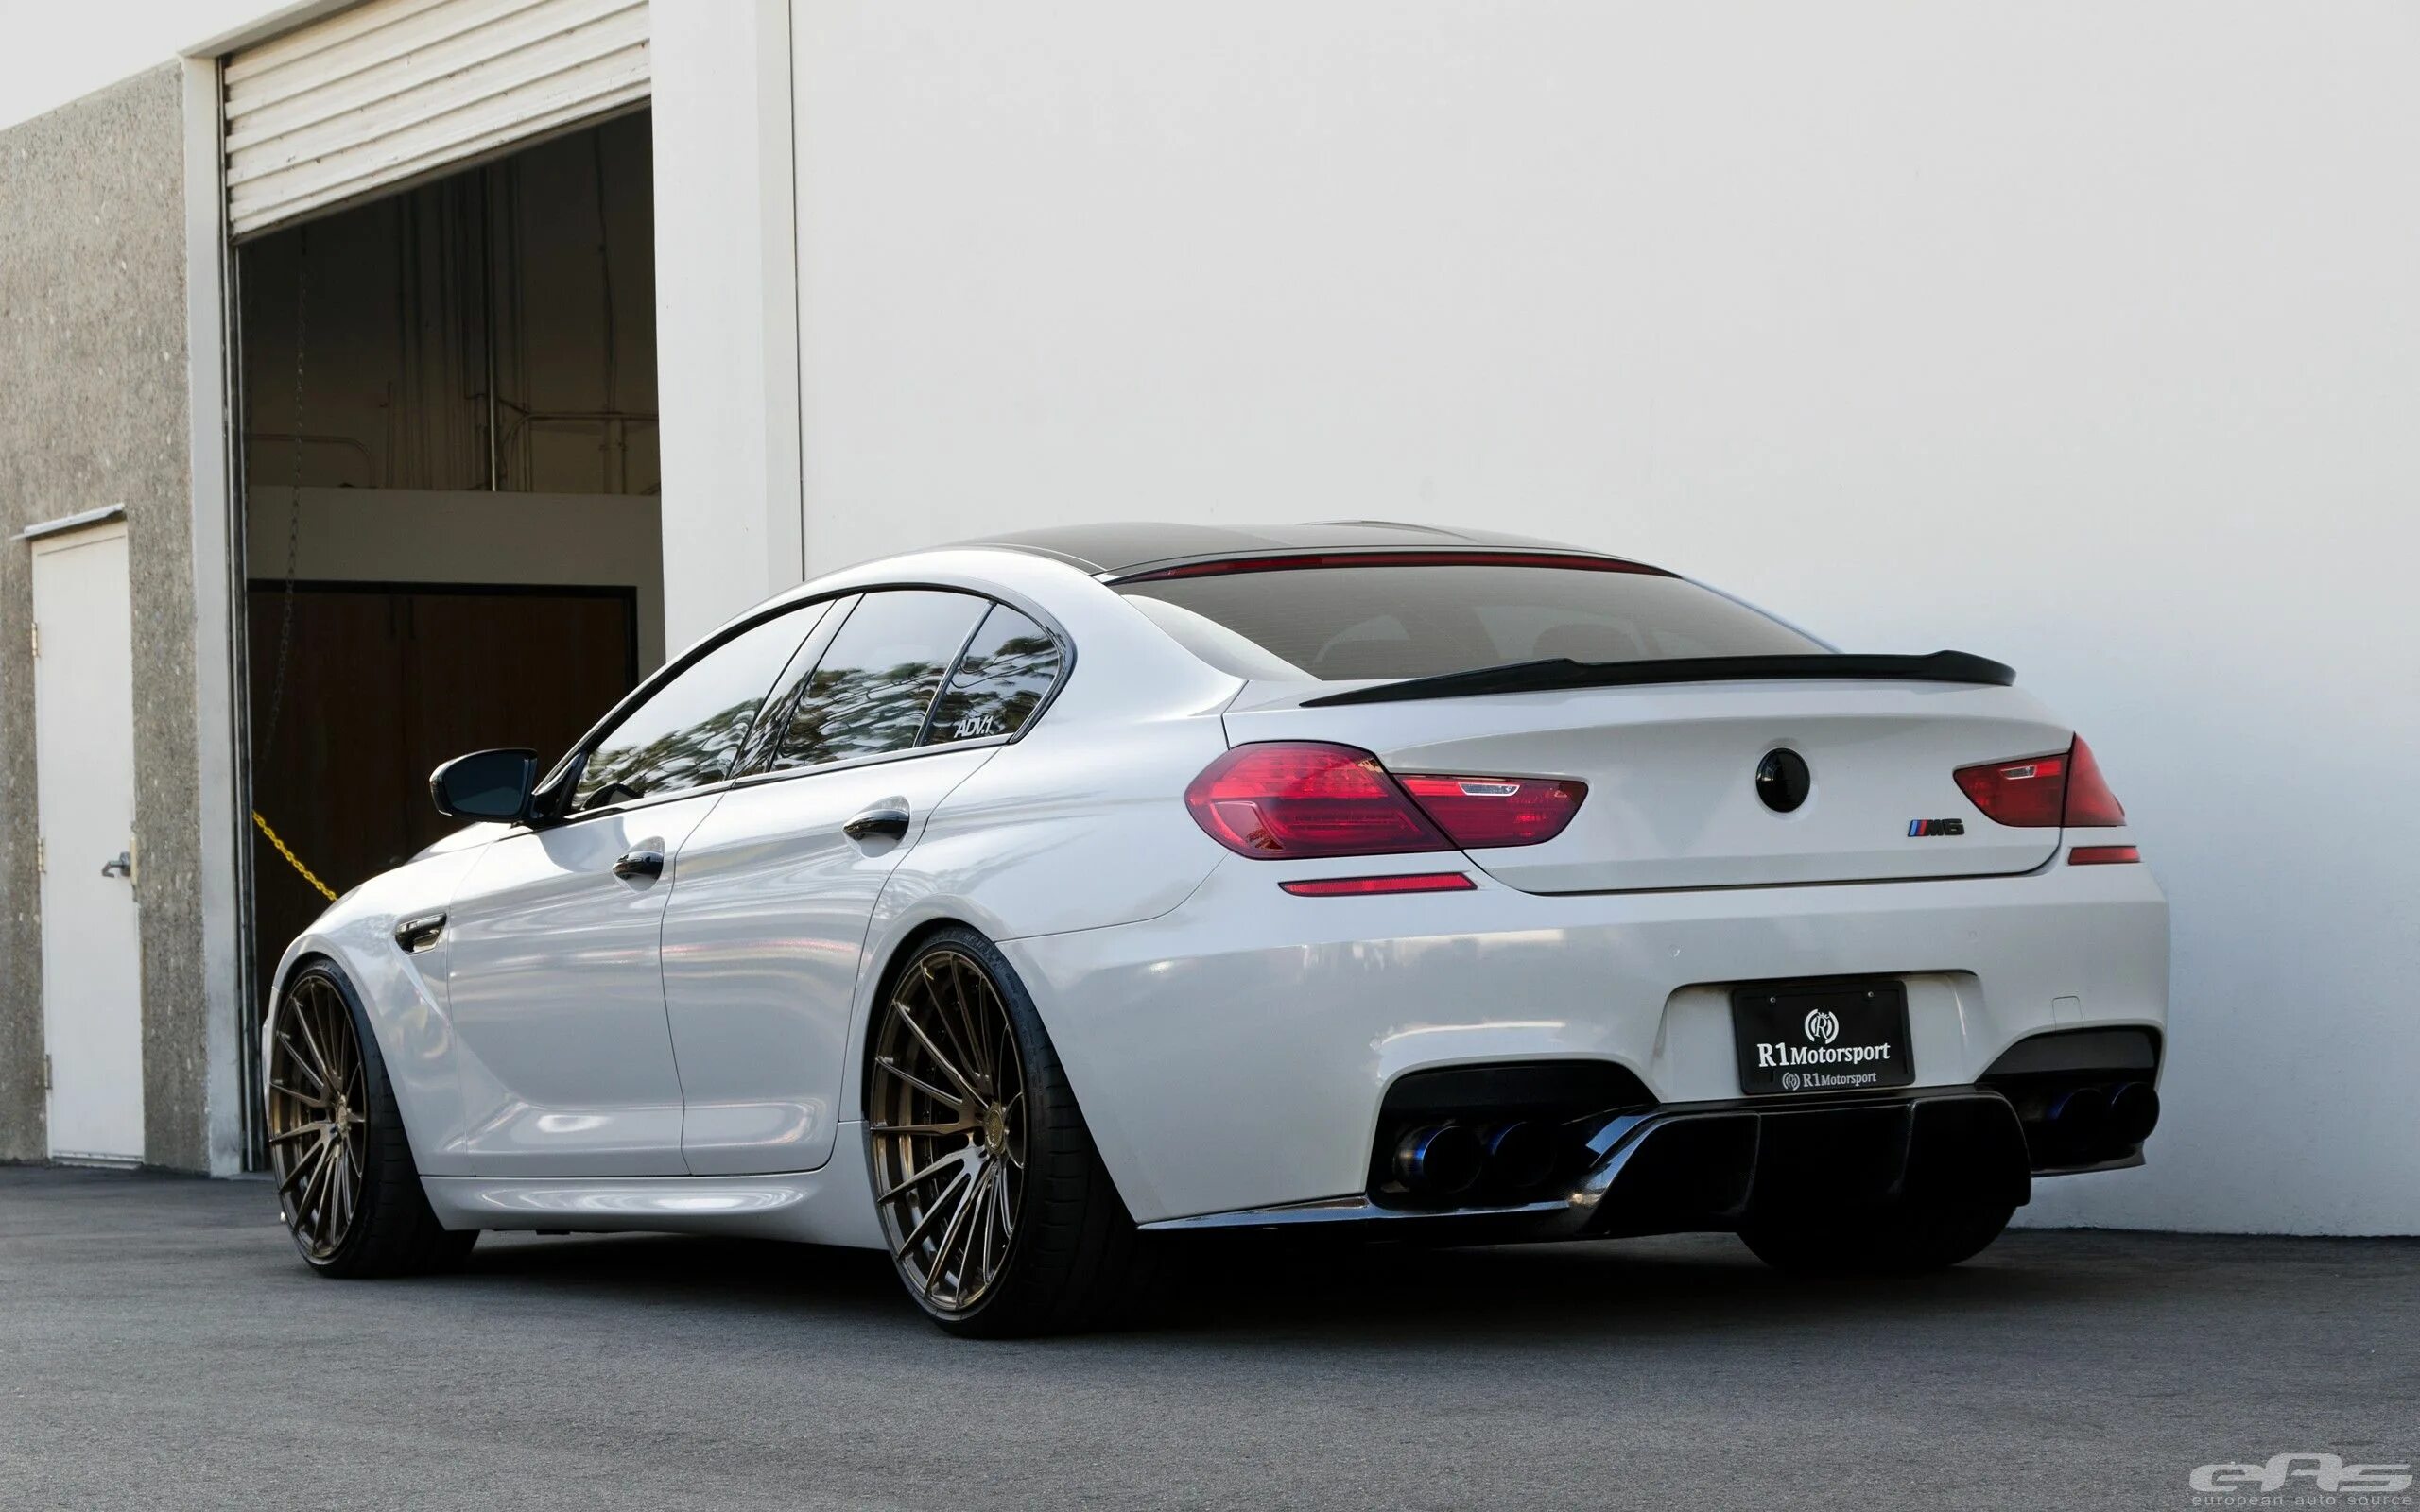 М 06 8. BMW m6 Gran Coupe. BMW m6 f10. BMW 6 Gran Coupe Tuning. BMW m6 Coupe Tuning.